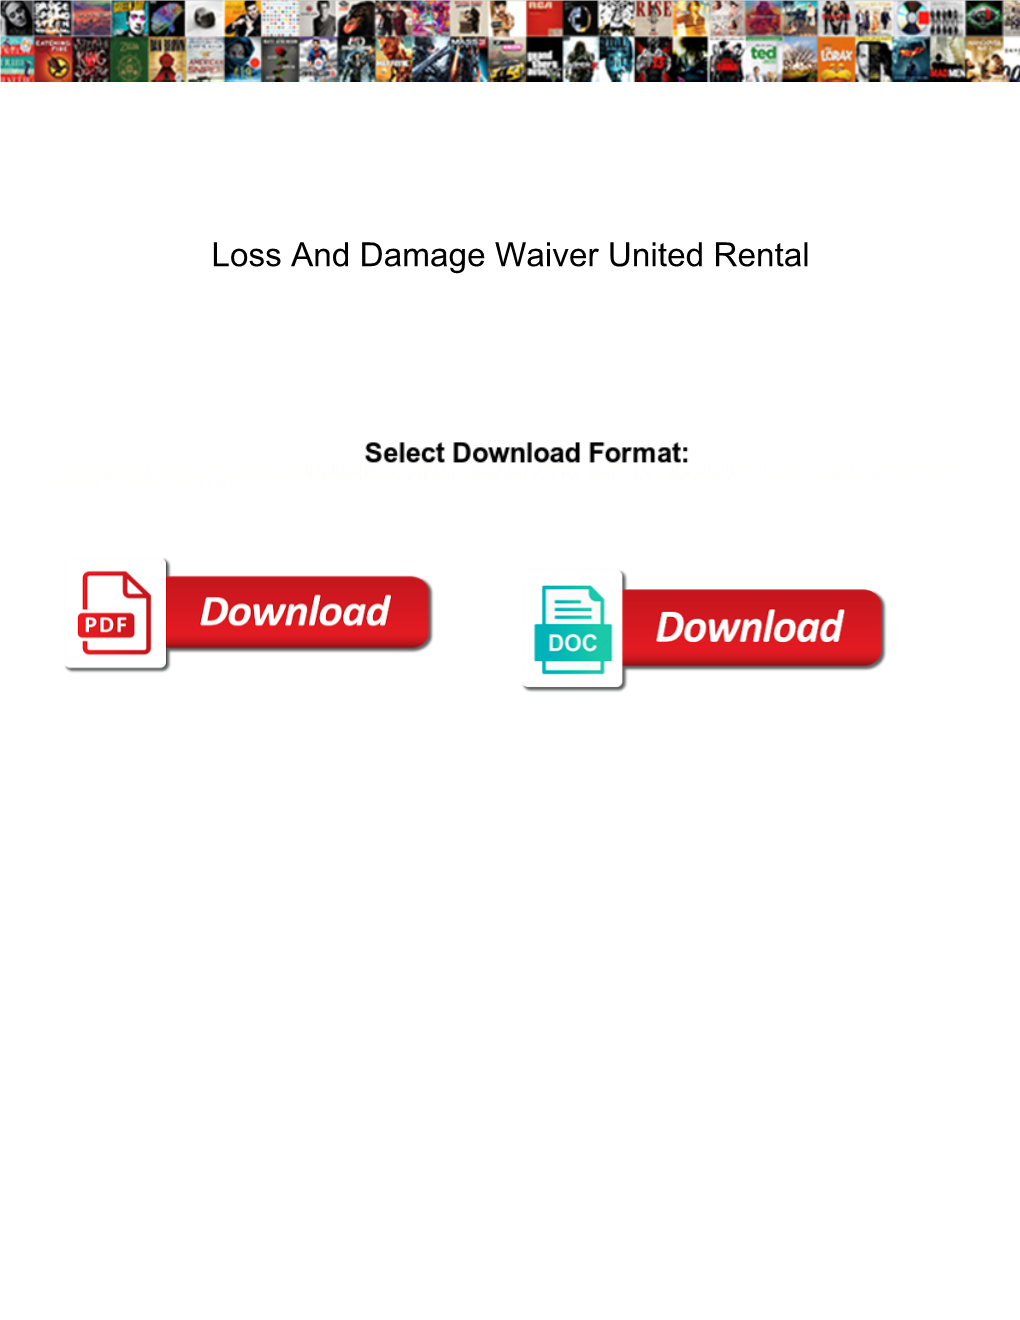 Loss and Damage Waiver United Rental